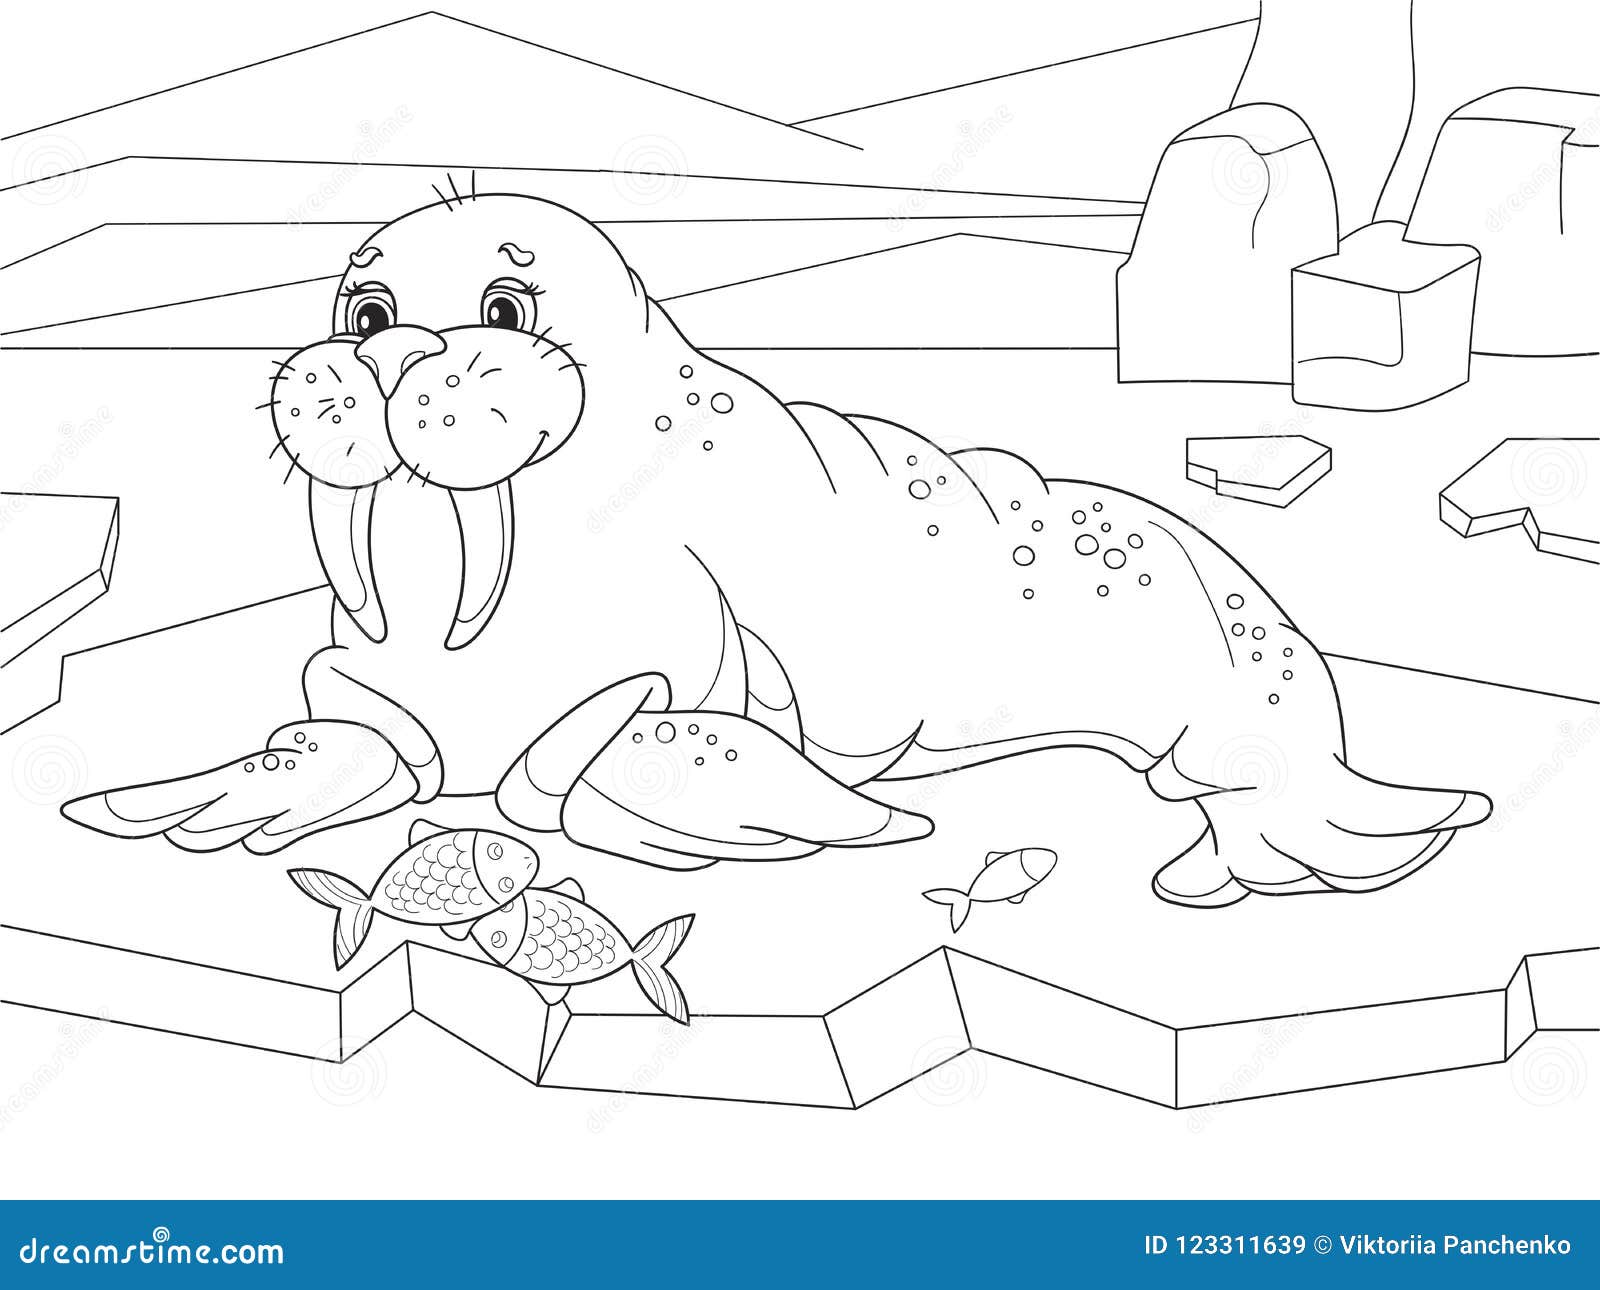 Download The Walrus Flippered Marine Mammal With A Discontinuous Distribution About The North Pole In The ...